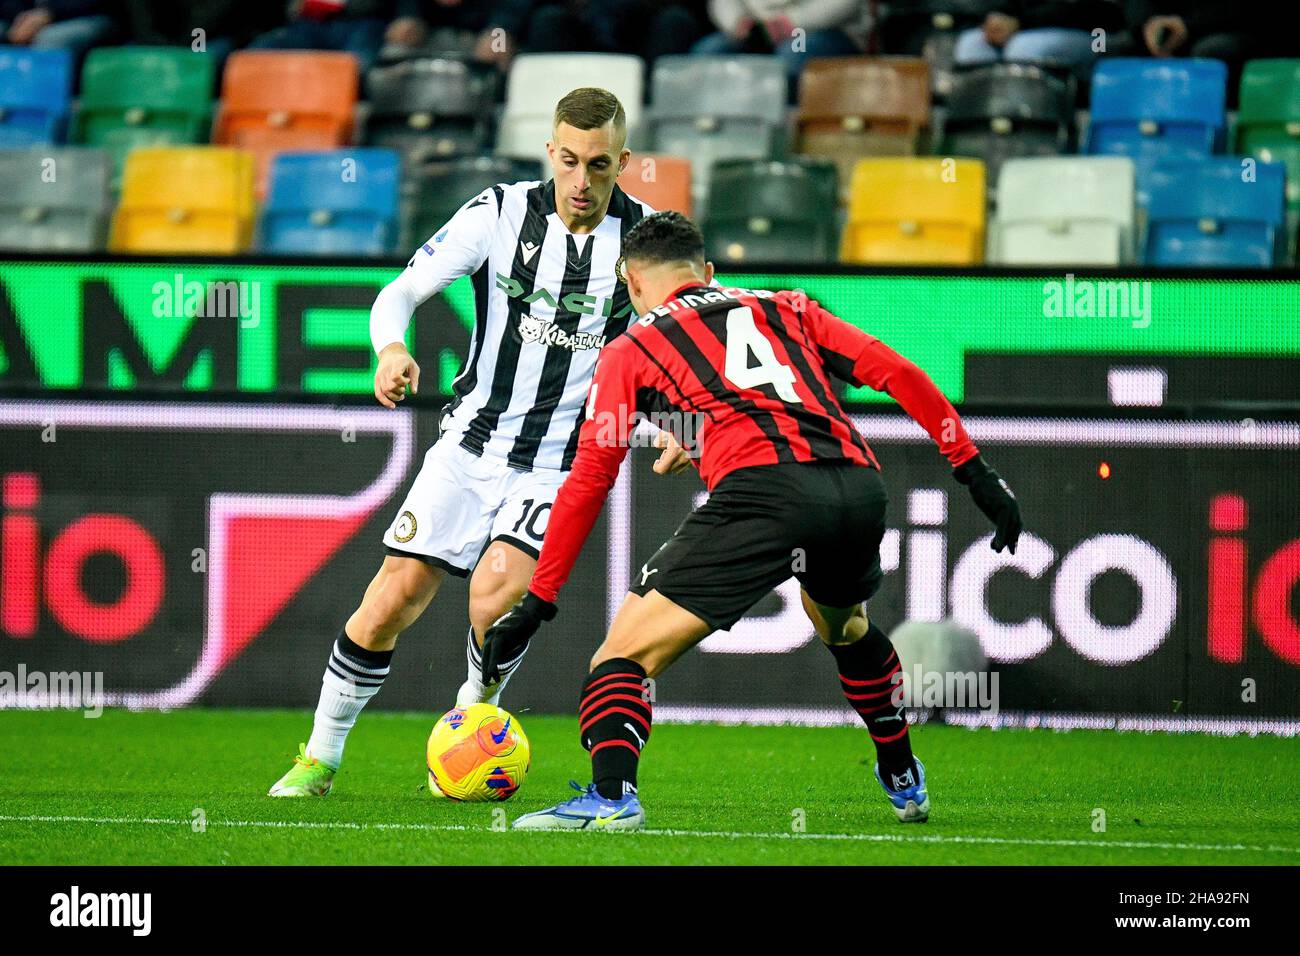 Udine, Italy. 11th Dec, 2021. Udinese's Gerard Deulofeu in action against  Milan's Ismael Bennacer (Milan) during Udinese Calcio vs AC Milan, italian  soccer Serie A match in Udine, Italy, December 11 2021